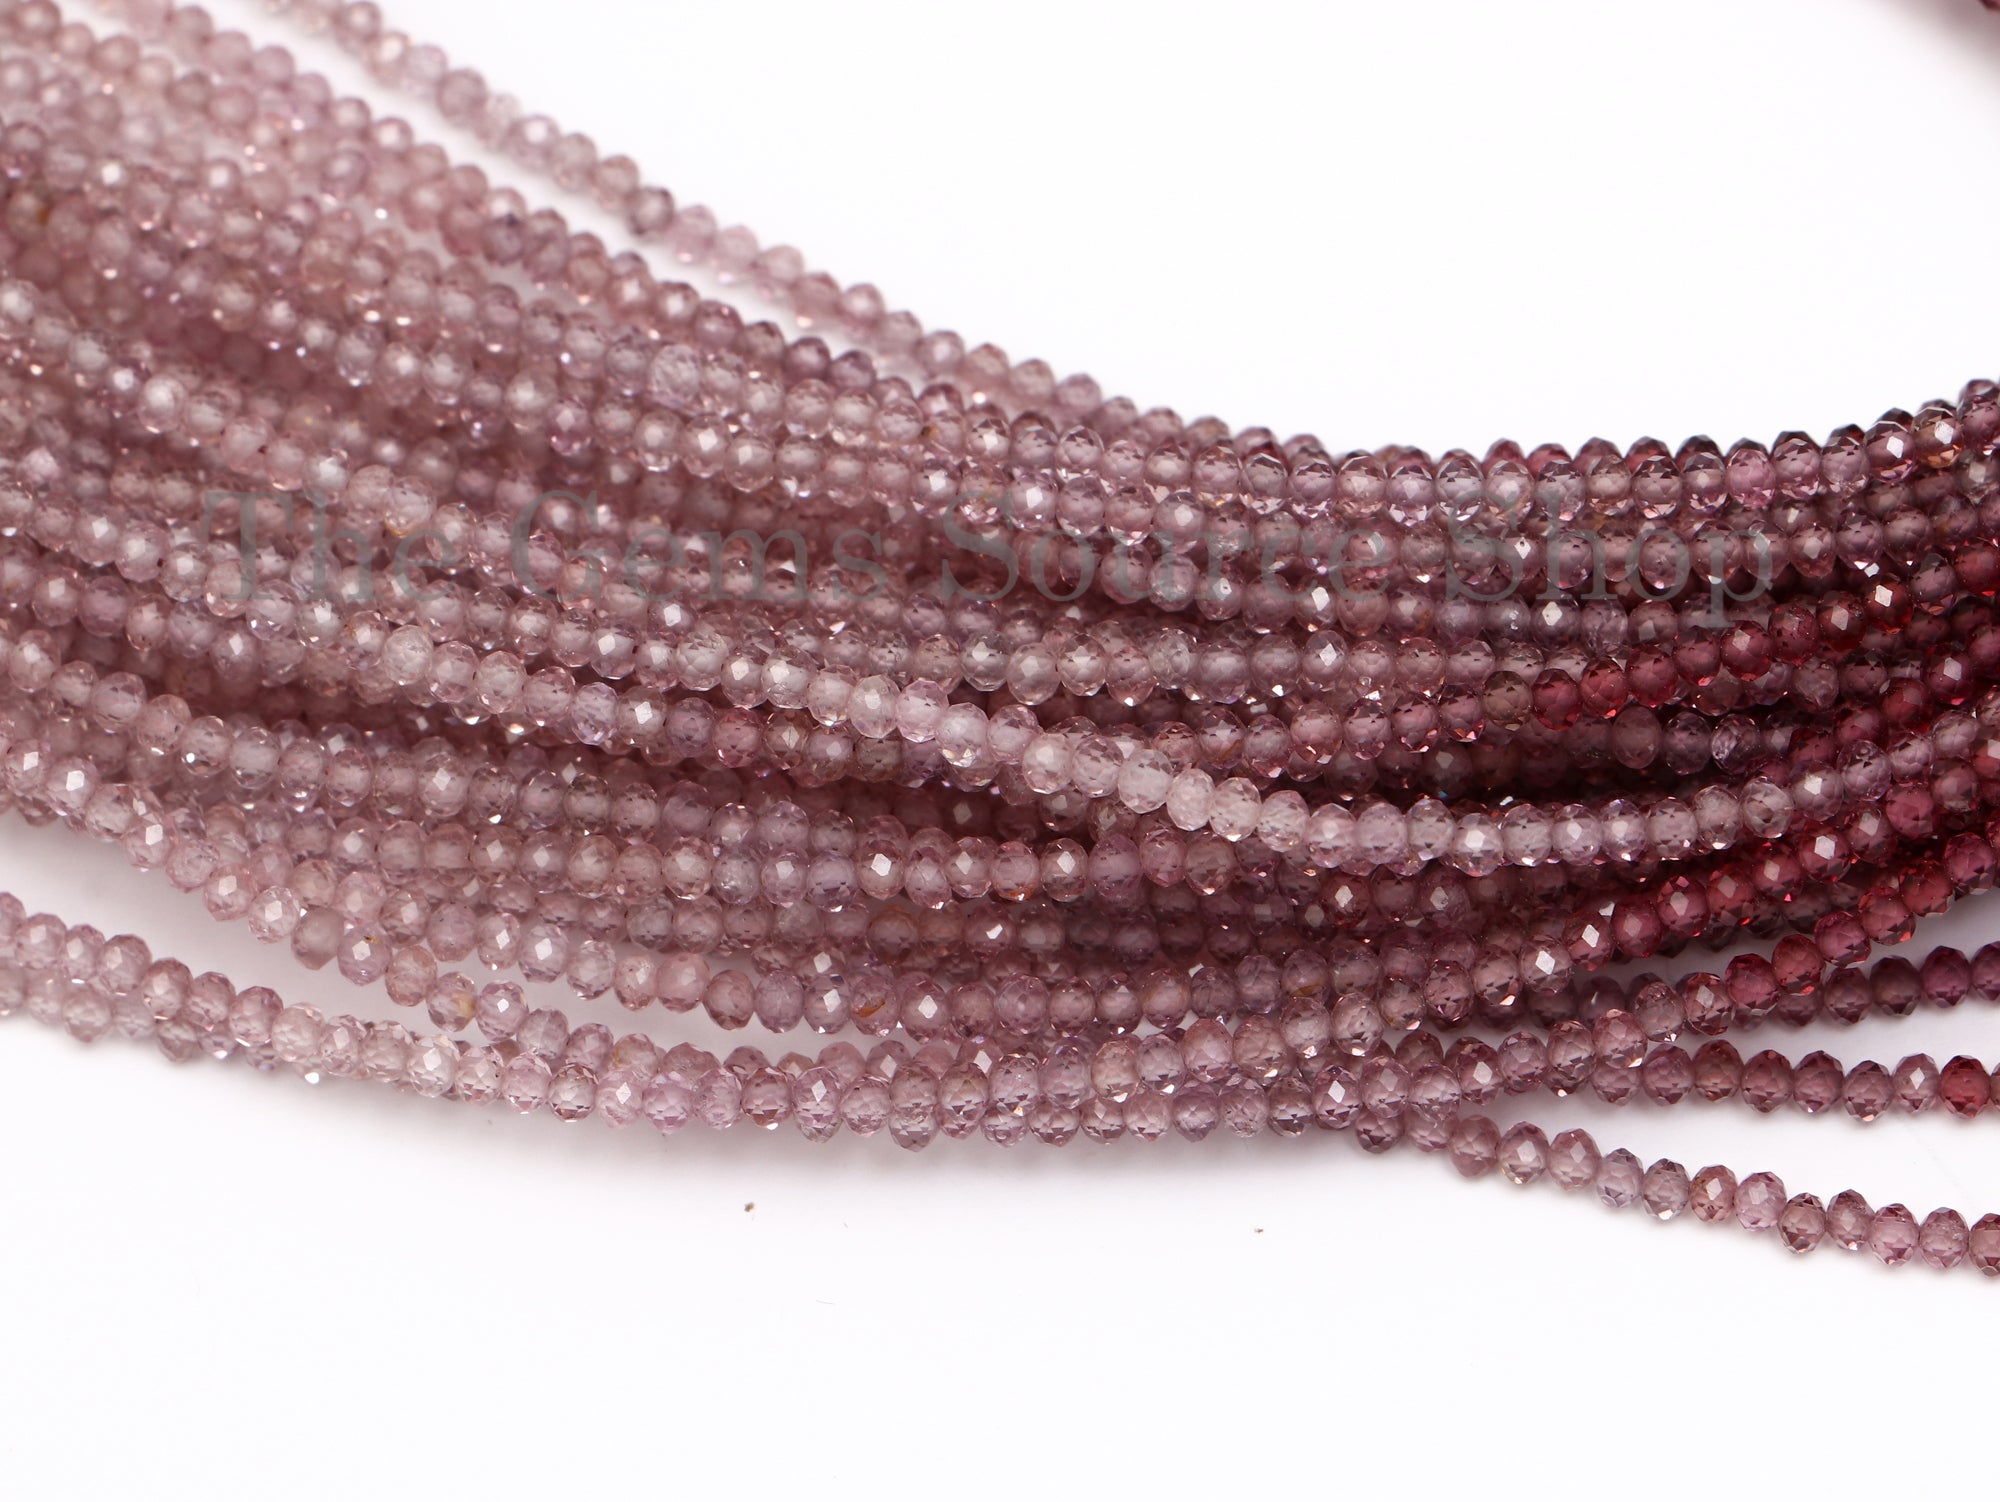 Shaded Light Pink Spinel Faceted Rondelle Beads, Spinel Rondelle Beads, Spinel Faceted Beads, Spinel Beads, Faceted Beads, Micro Tiny Beads